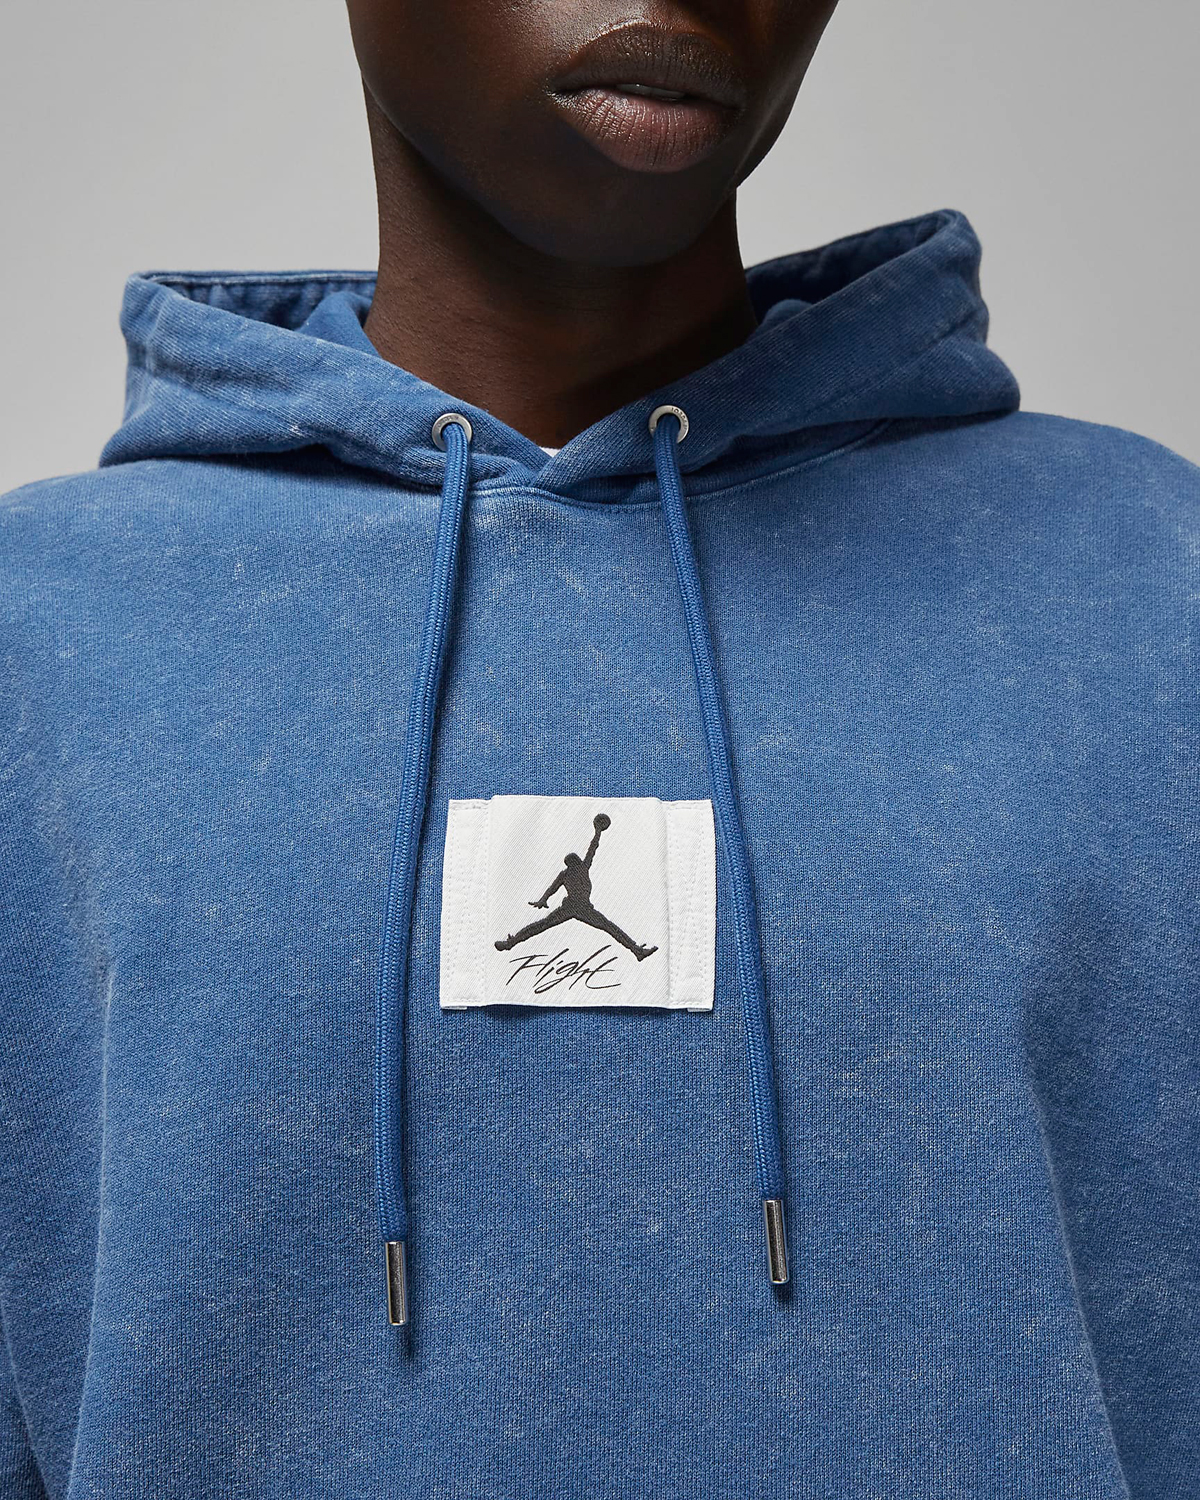 Air Jordan 13 French Blue 2022 Hoodie and Pants Outfit